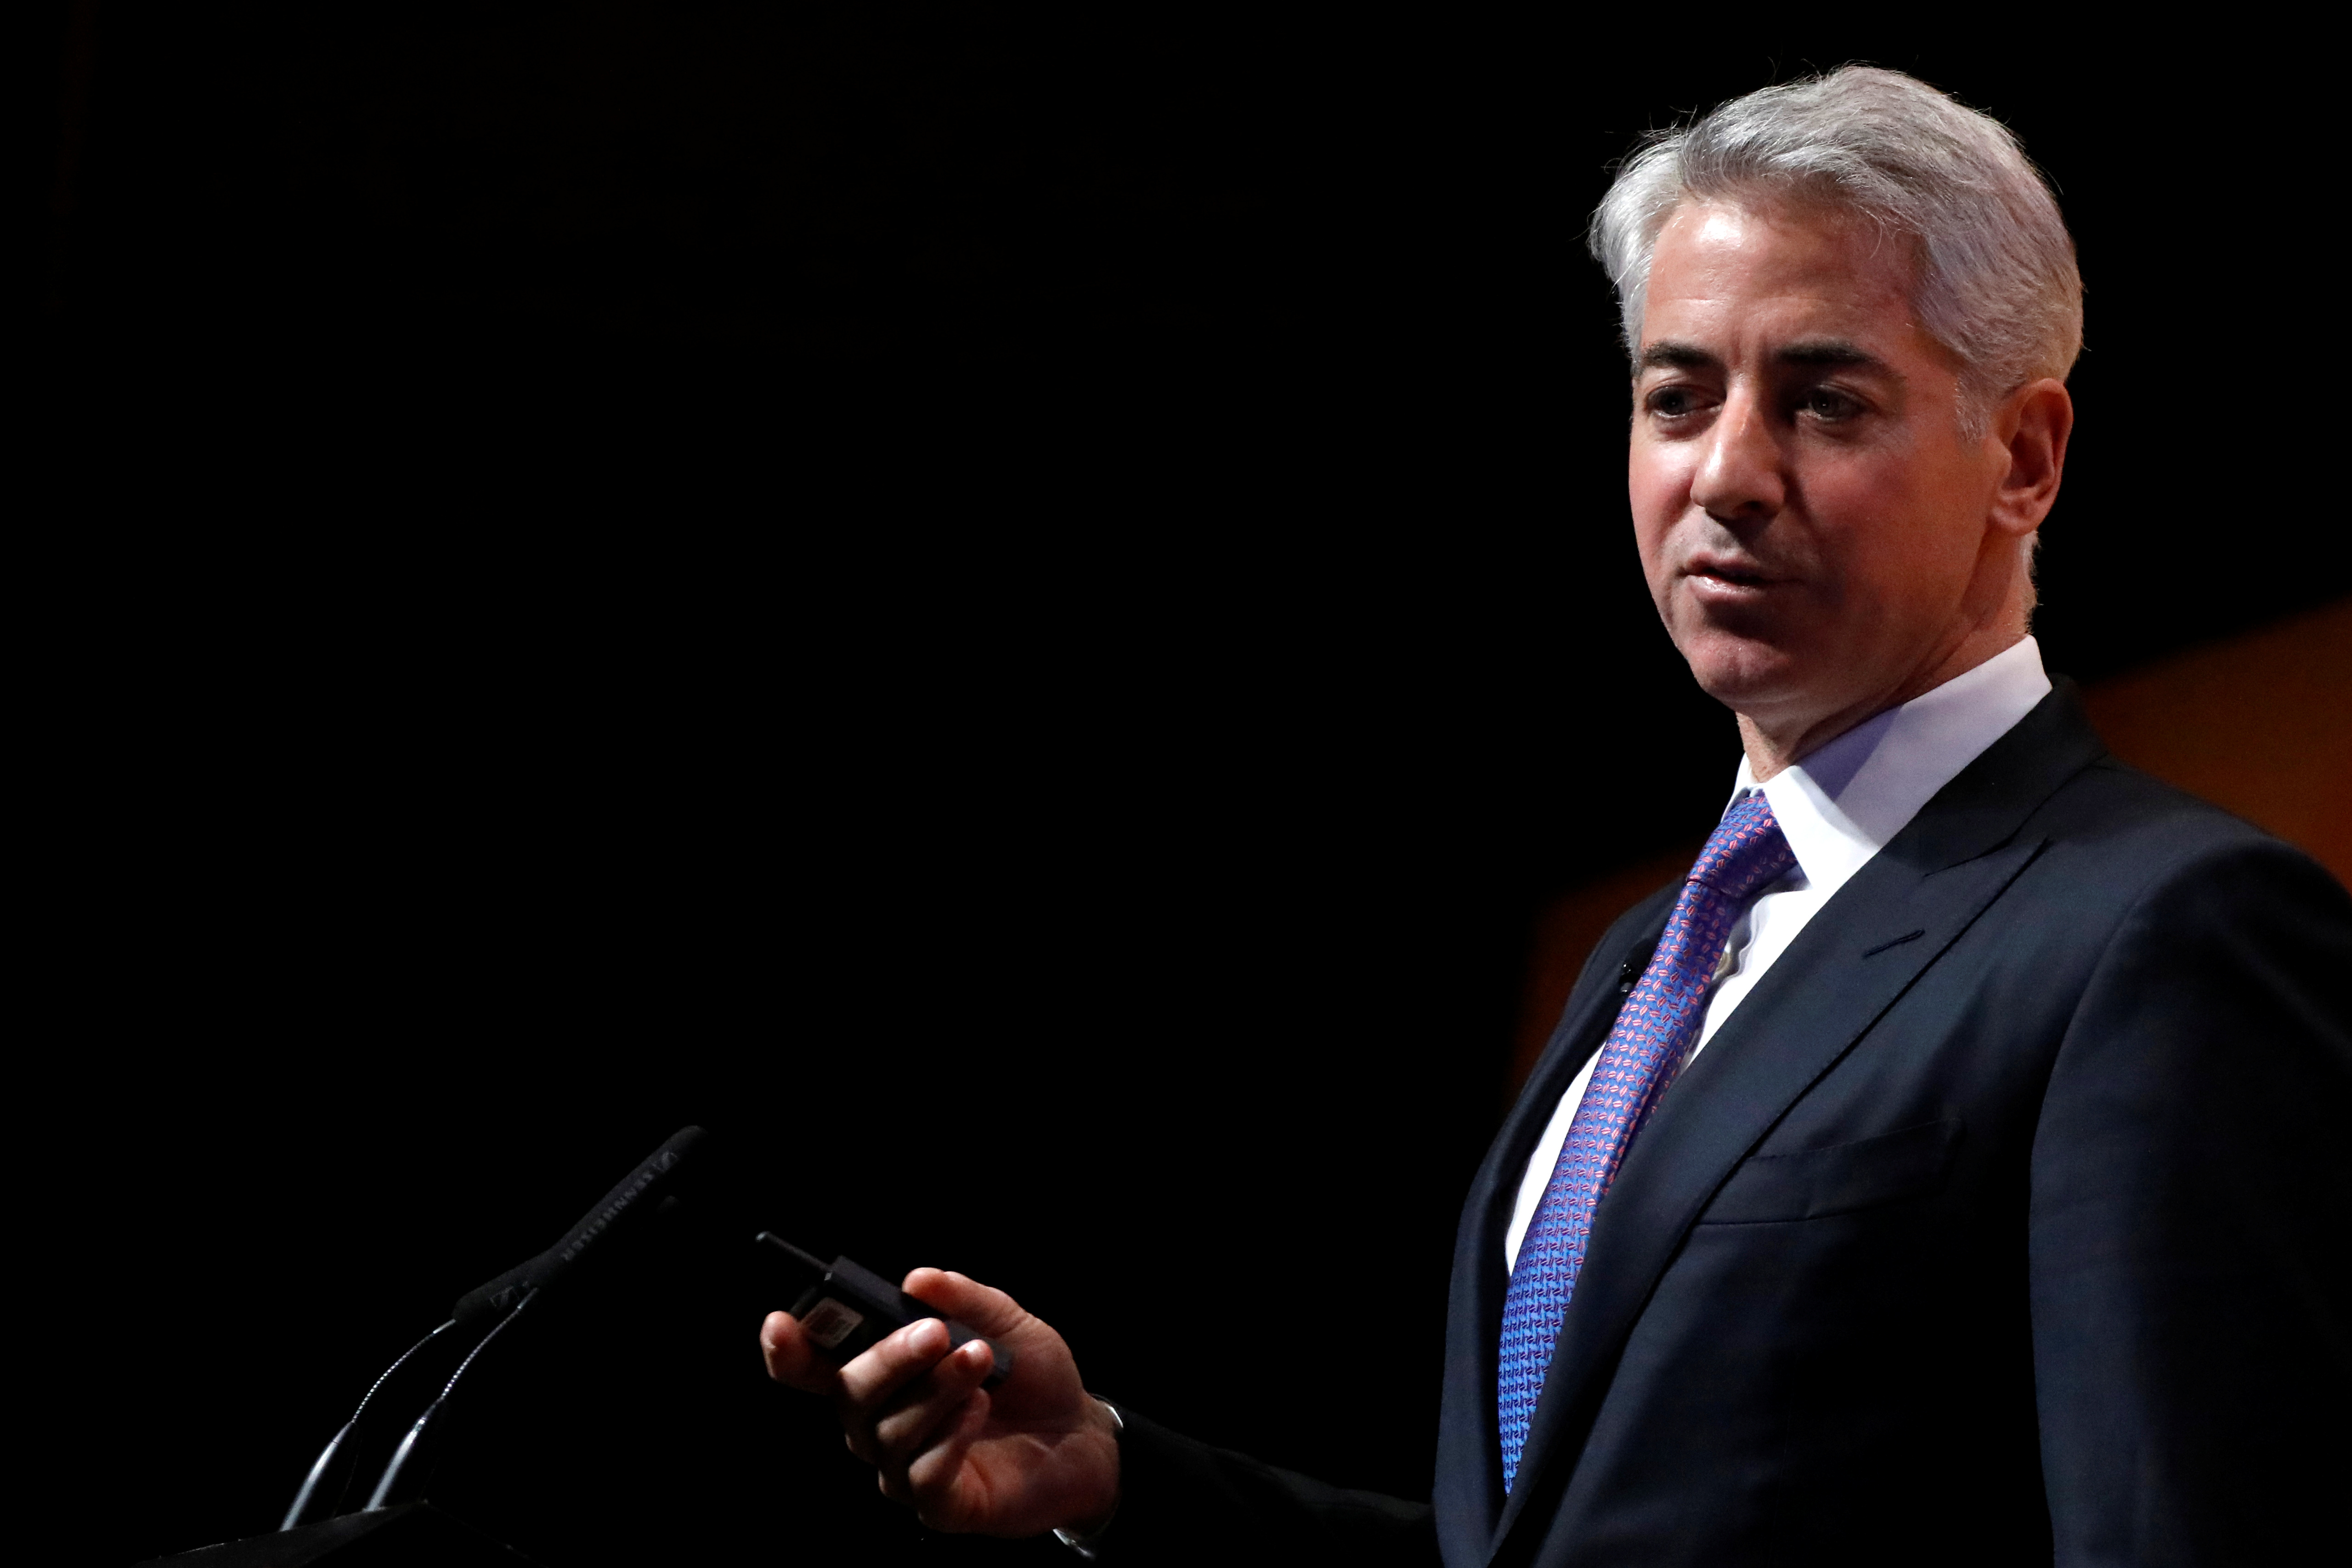 William 'Bill' Ackman, CEO and Portfolio Manager of Pershing Square Capital Management, speaks during the Sohn Investment Conference in New York City